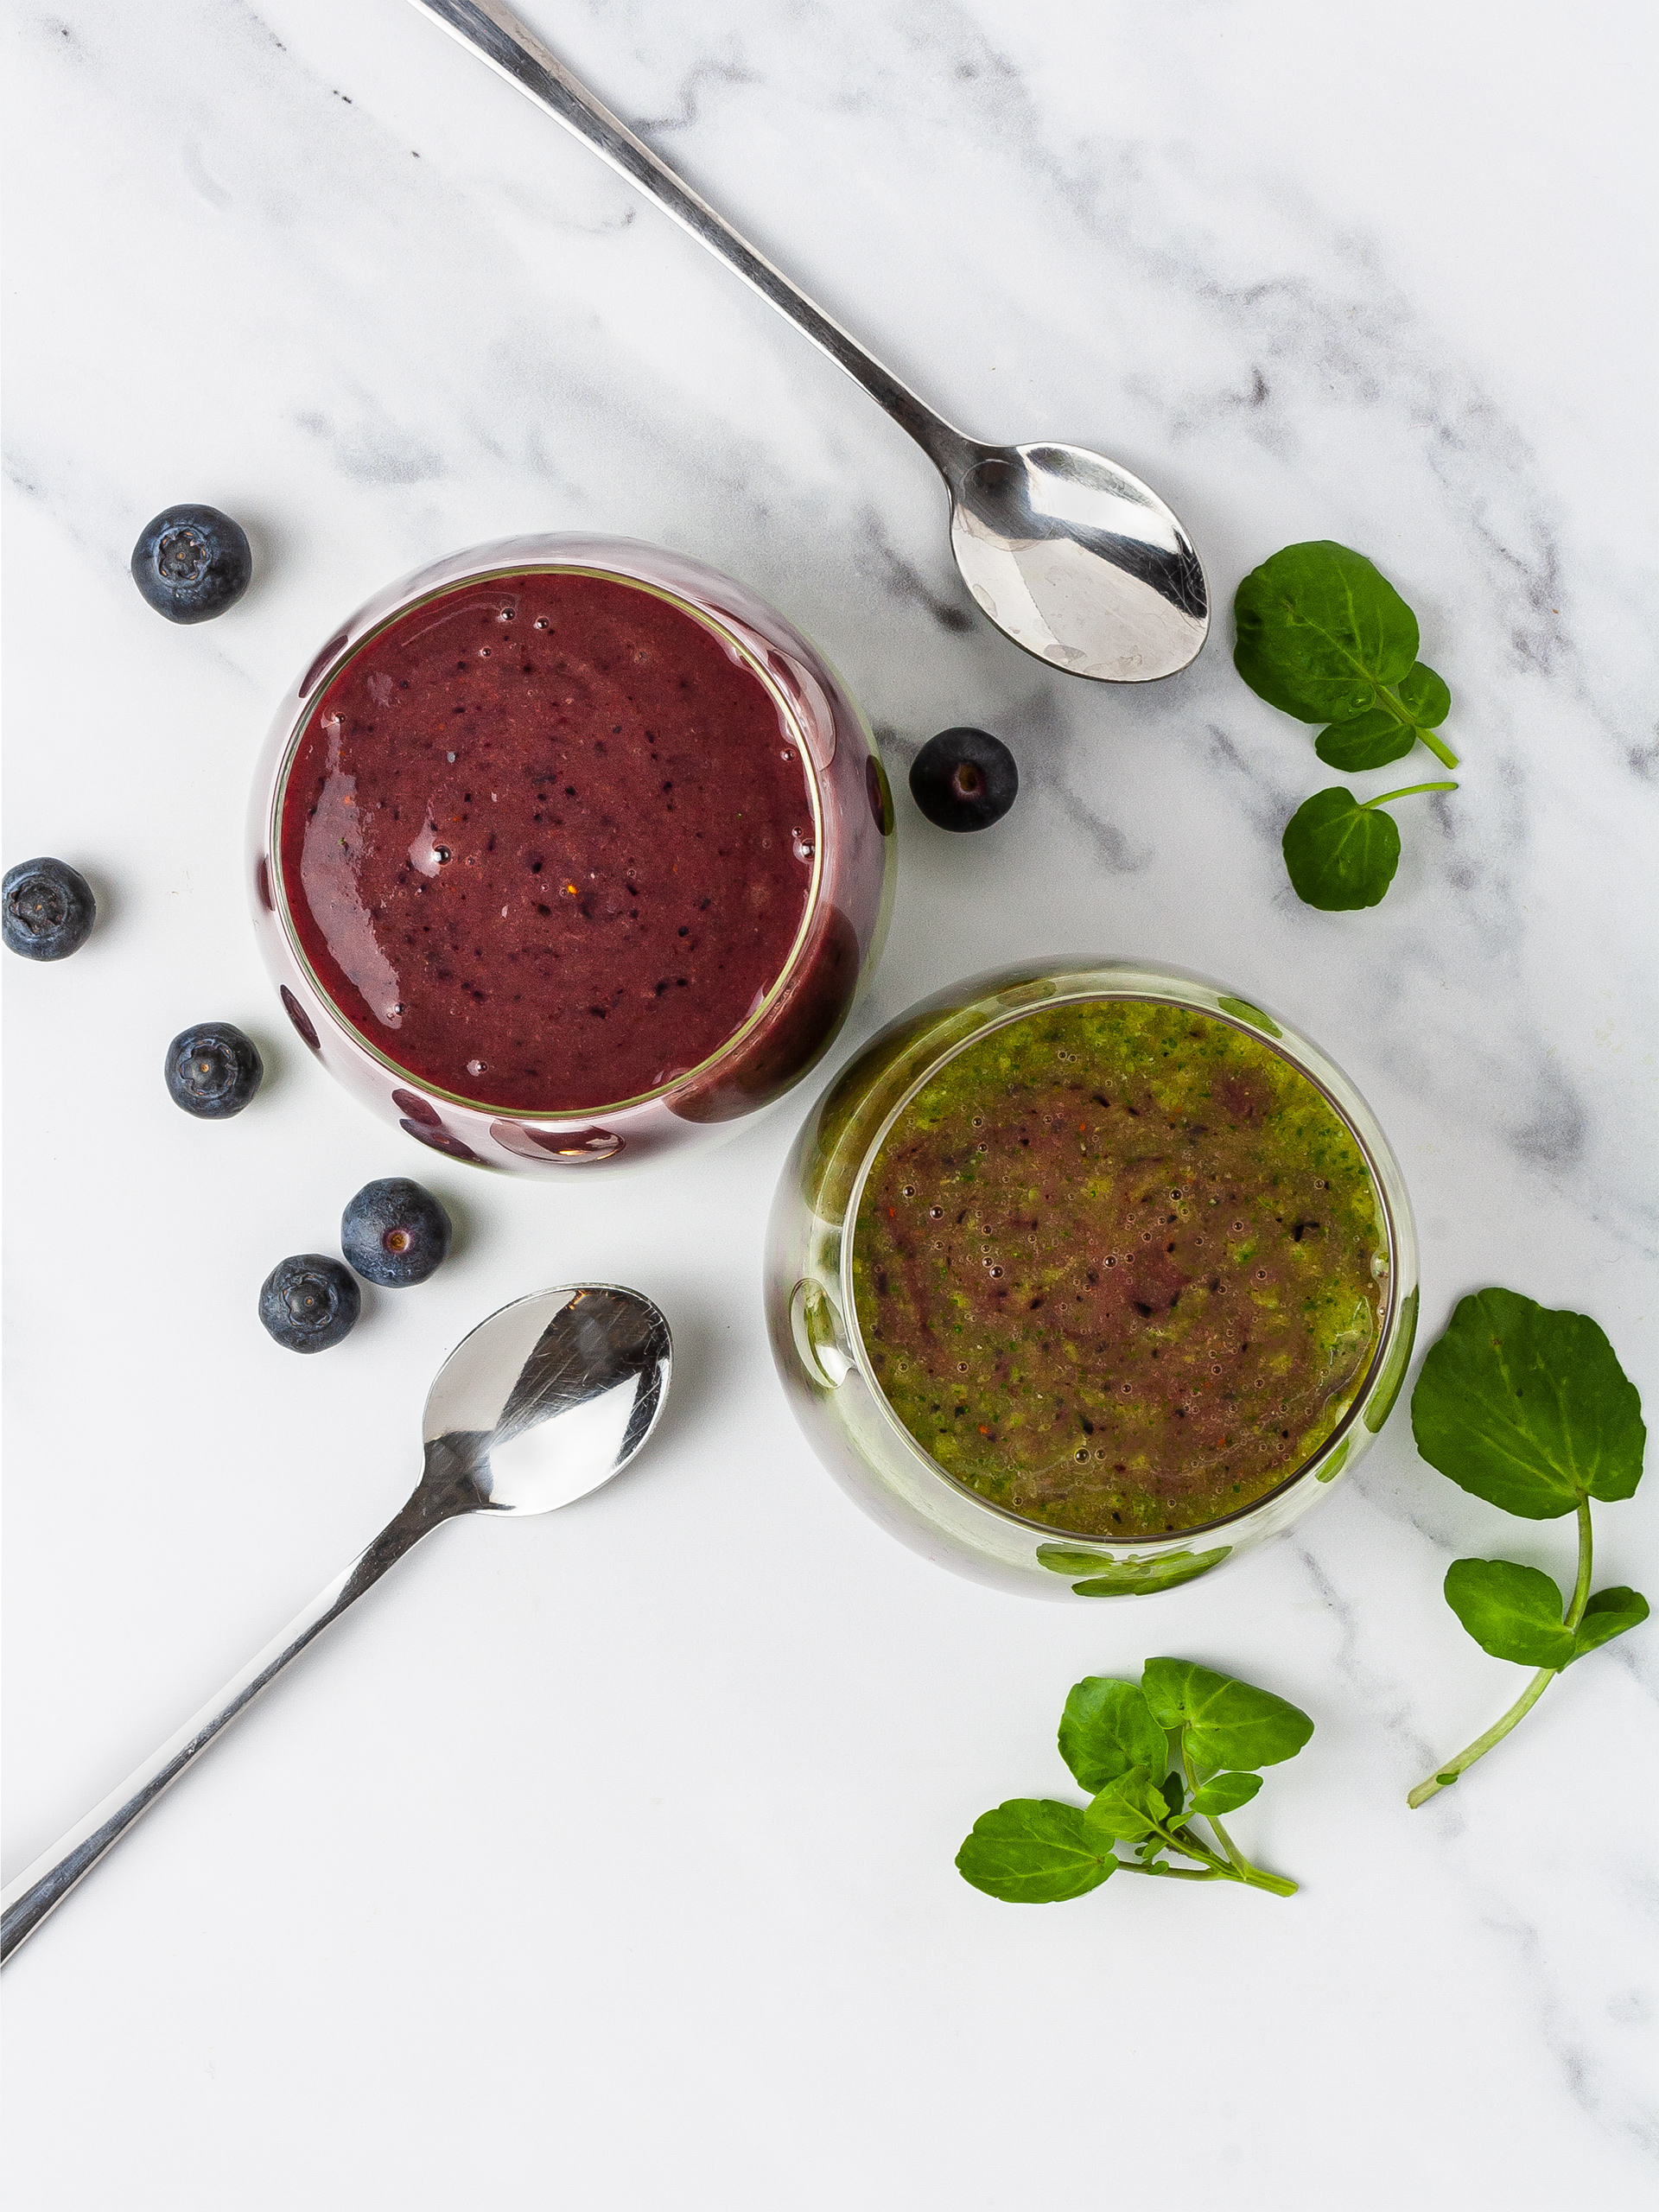 Watercress and blueberry green smoothie in serving glasses.